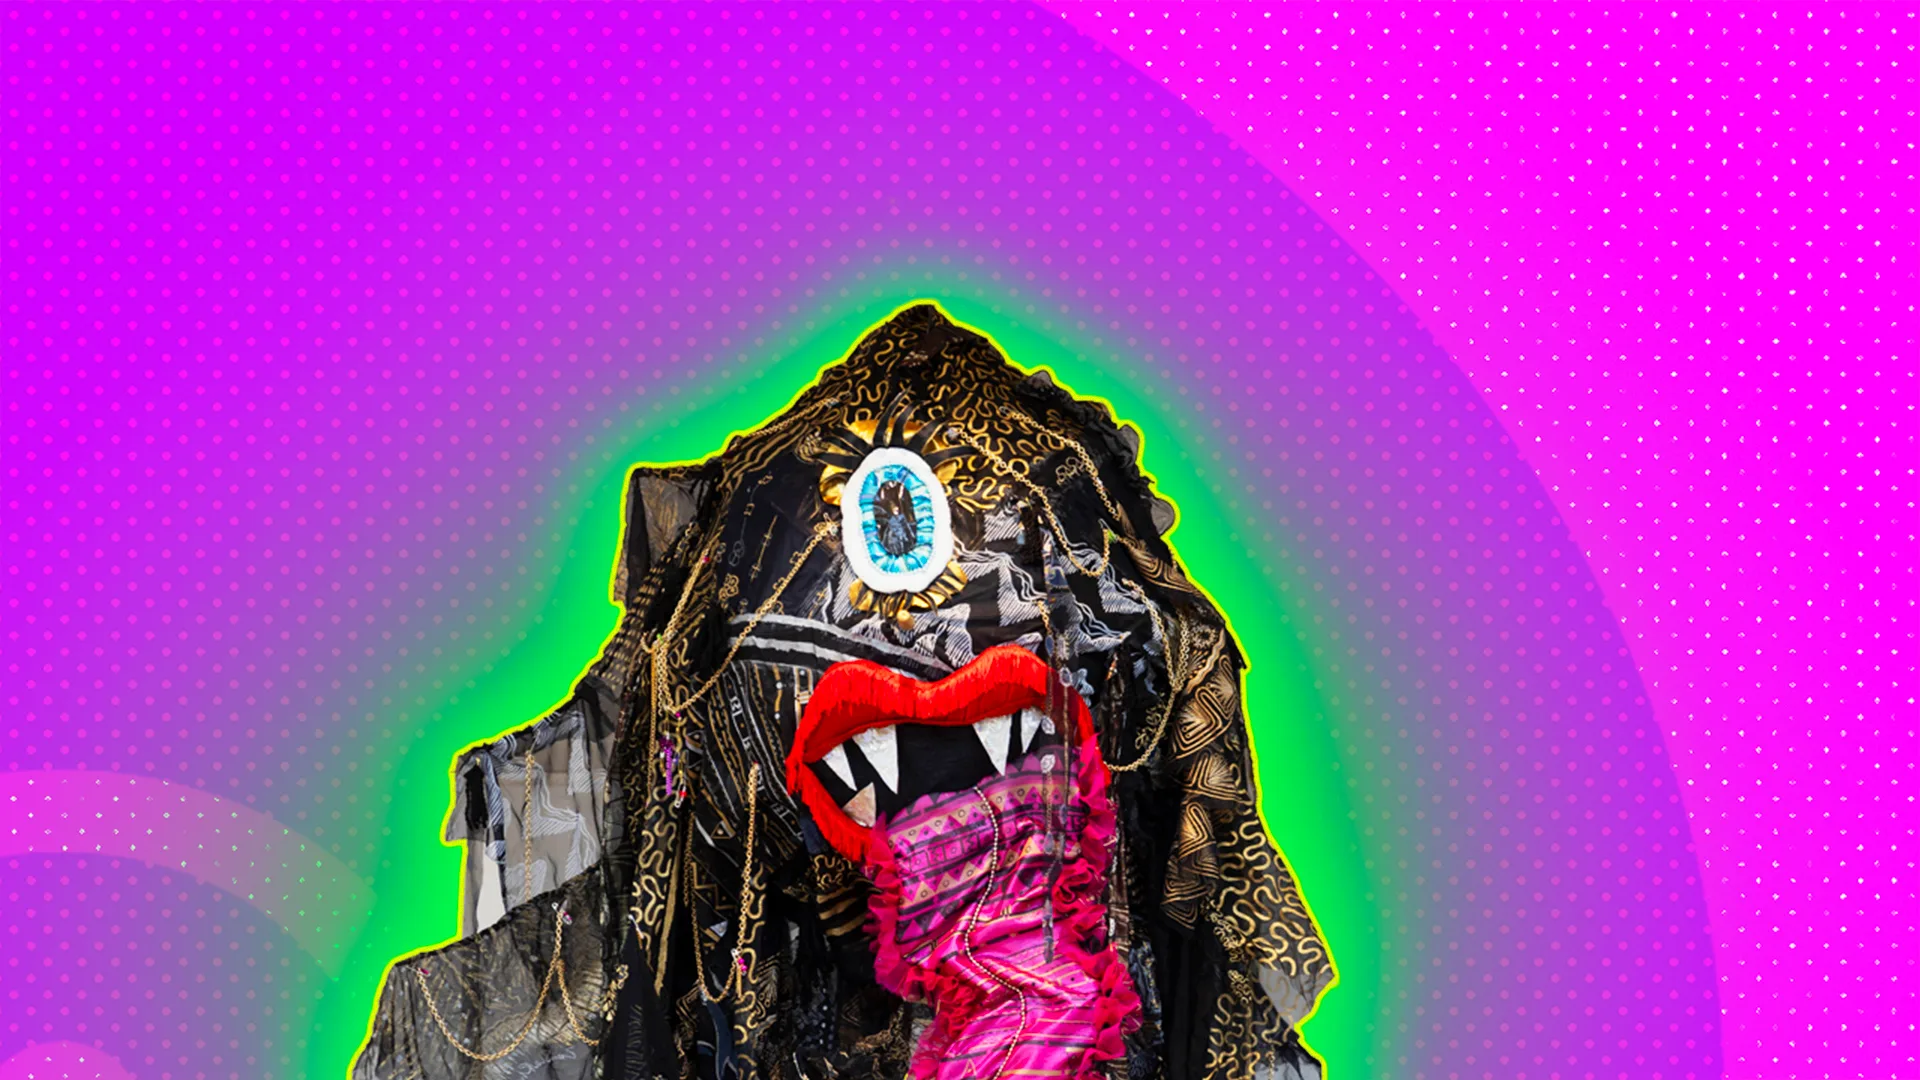 A Yōkai monster against a purple and pink background, with a lime green halo glow. The Yōkai 3d, and is made of black lacey fabric and has 1 large eye in the centre of its forehead, it has red lips and a long pink tongue made of fabric